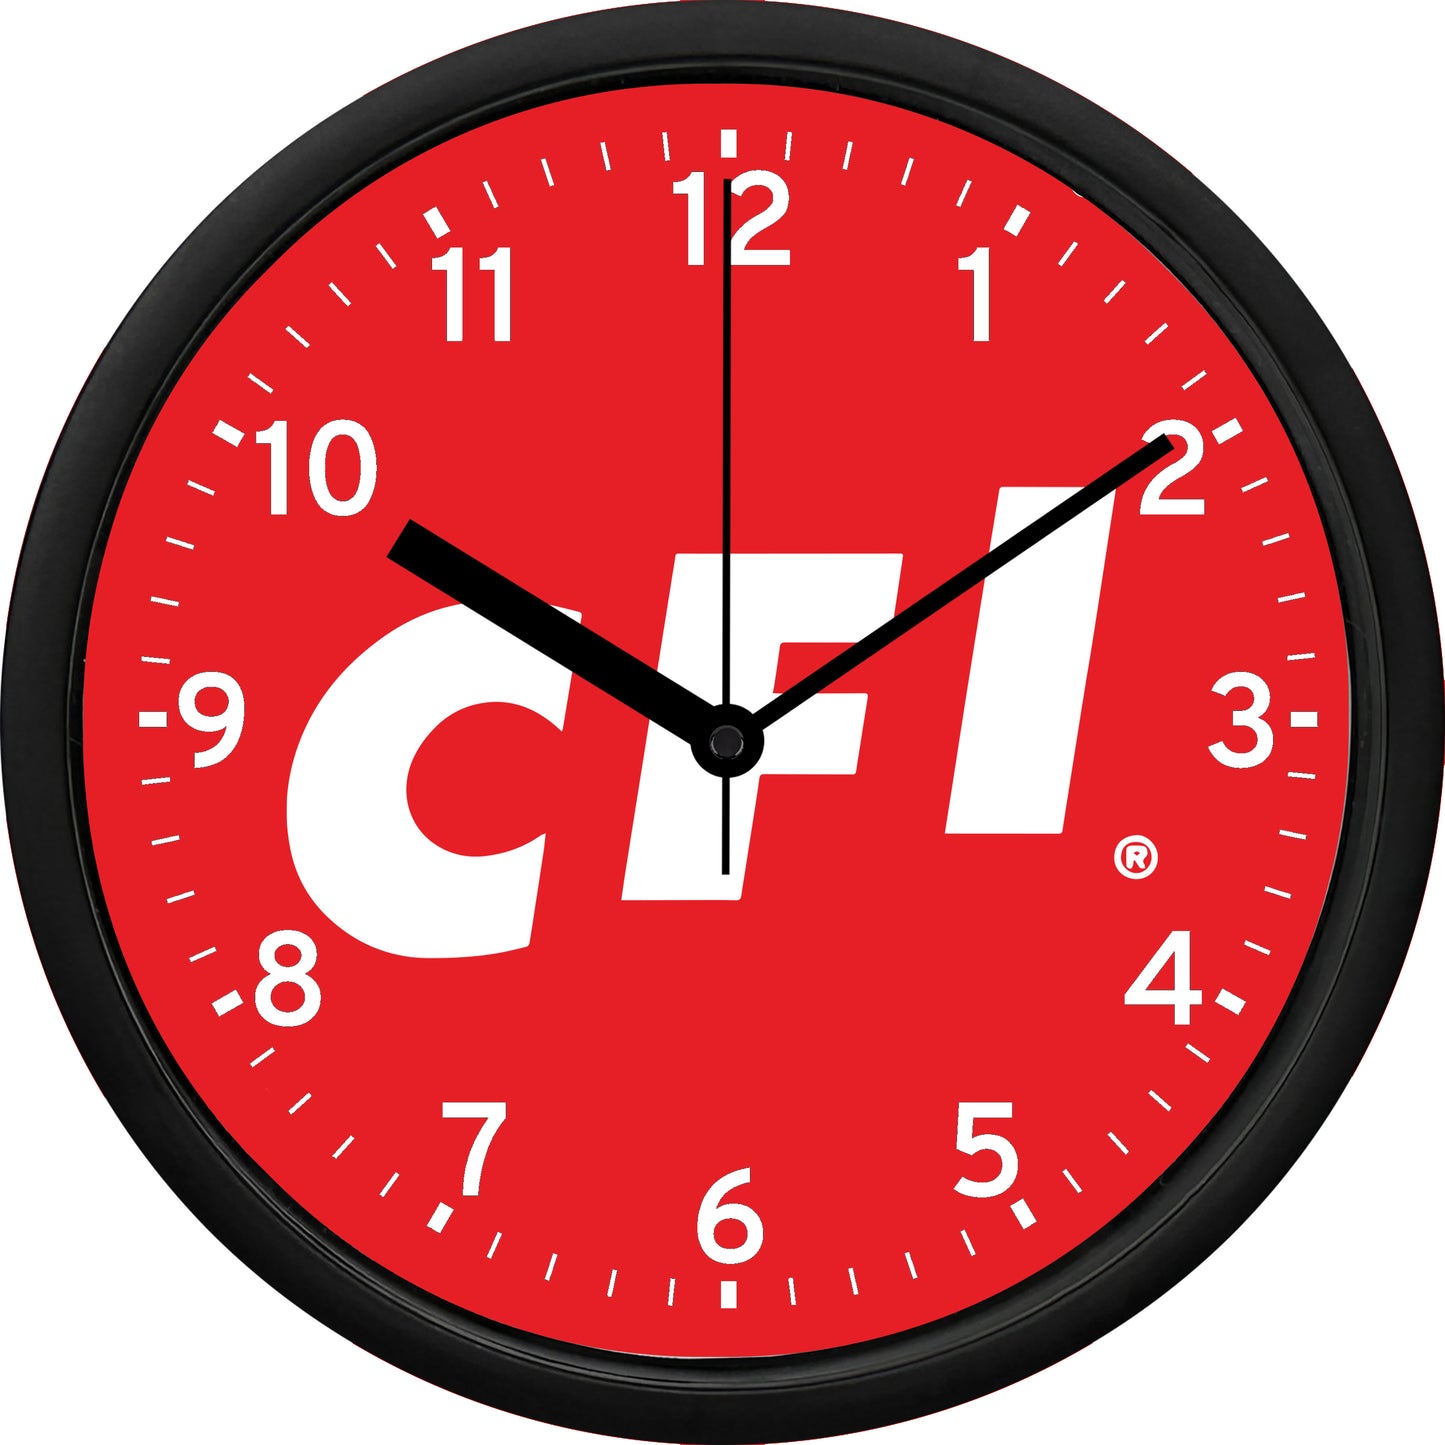 Contract Freighters Inc. "CFI" Wall Clock